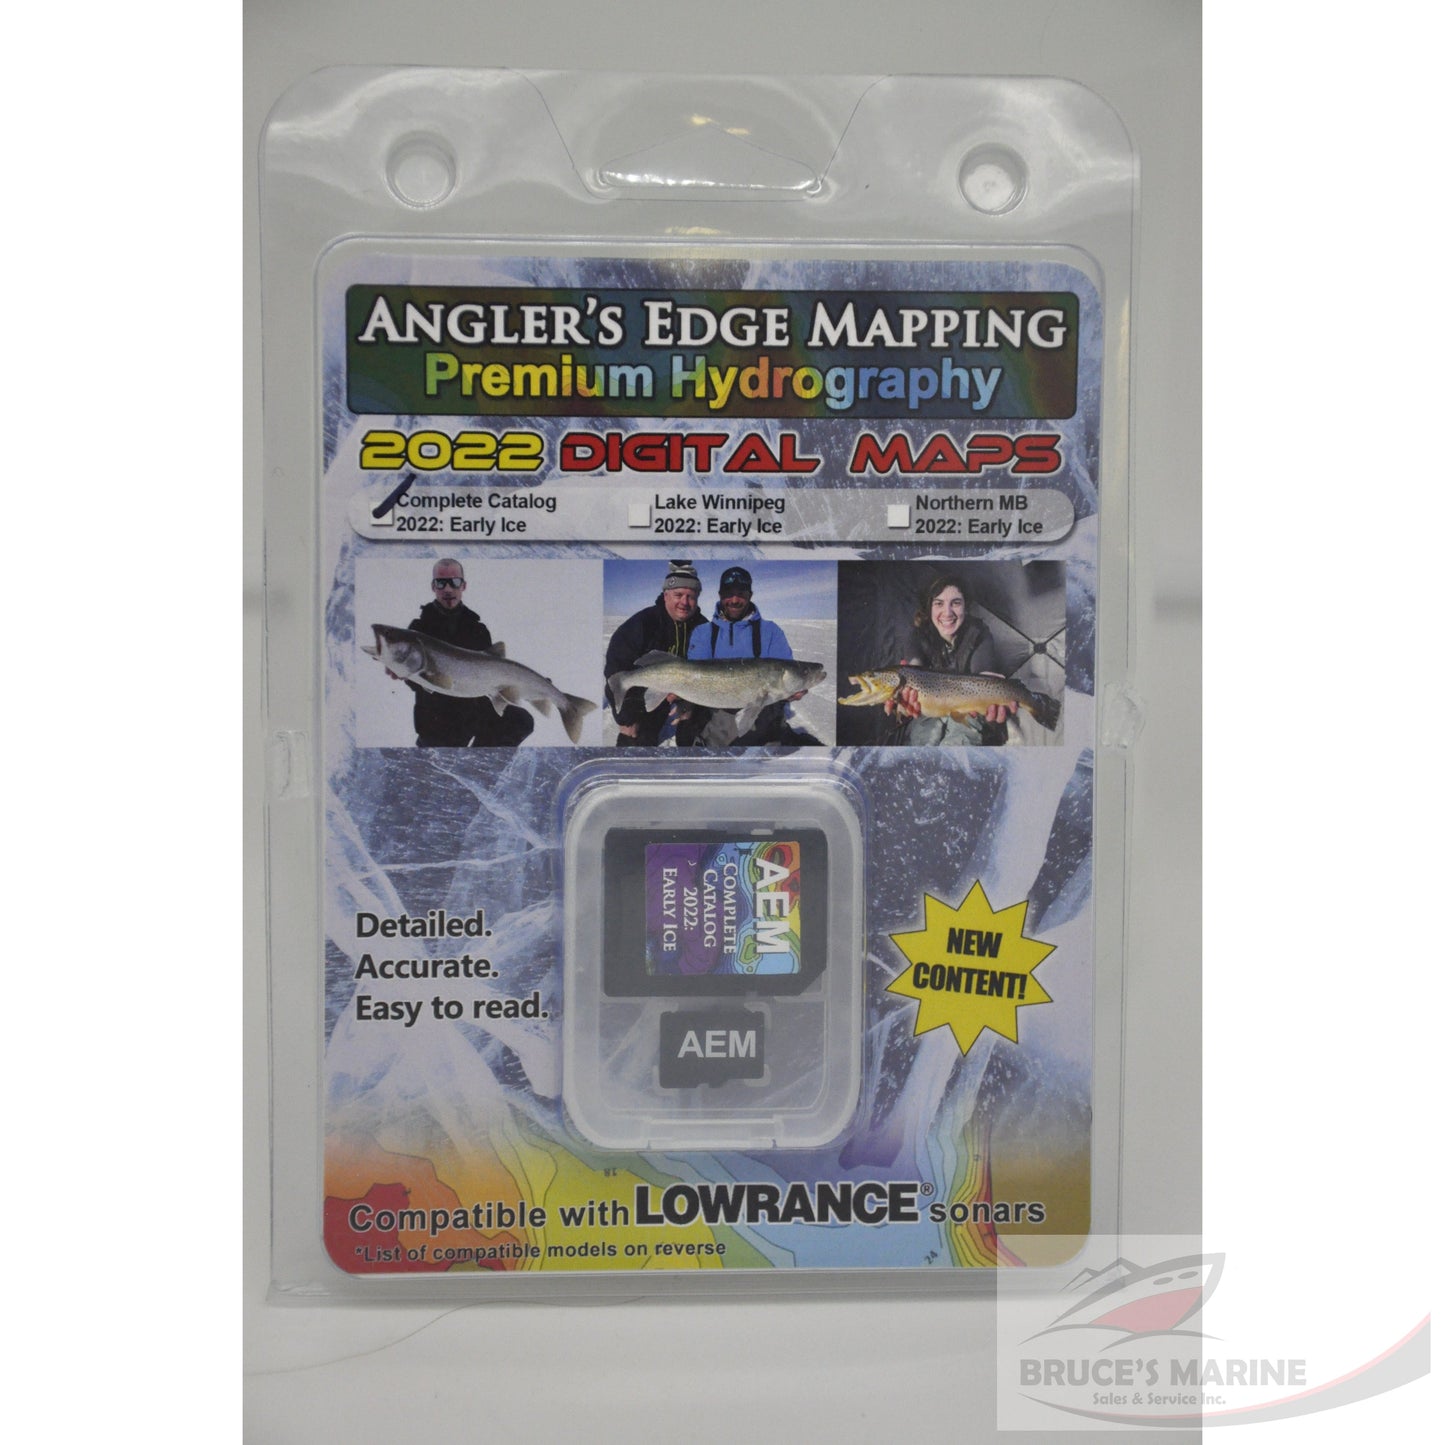 Angler's Edge Mapping COMPLETE CATALOG 2023: EARLY ICE